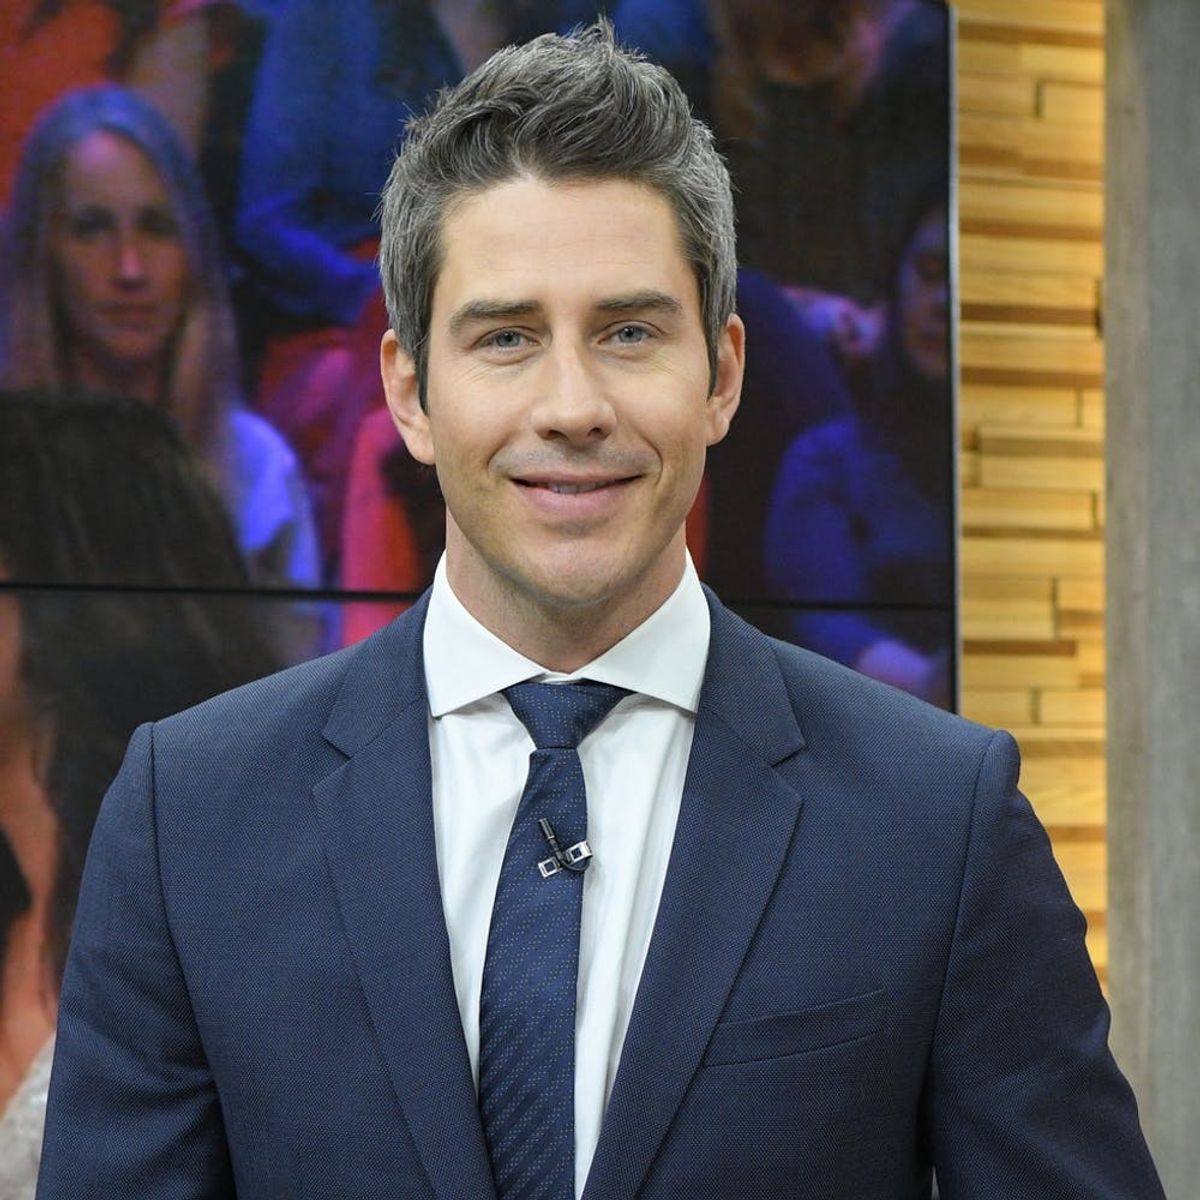 Arie Luyendyk Jr. Says He Filmed His Breakup With Becca So She Could Be the Bachelorette